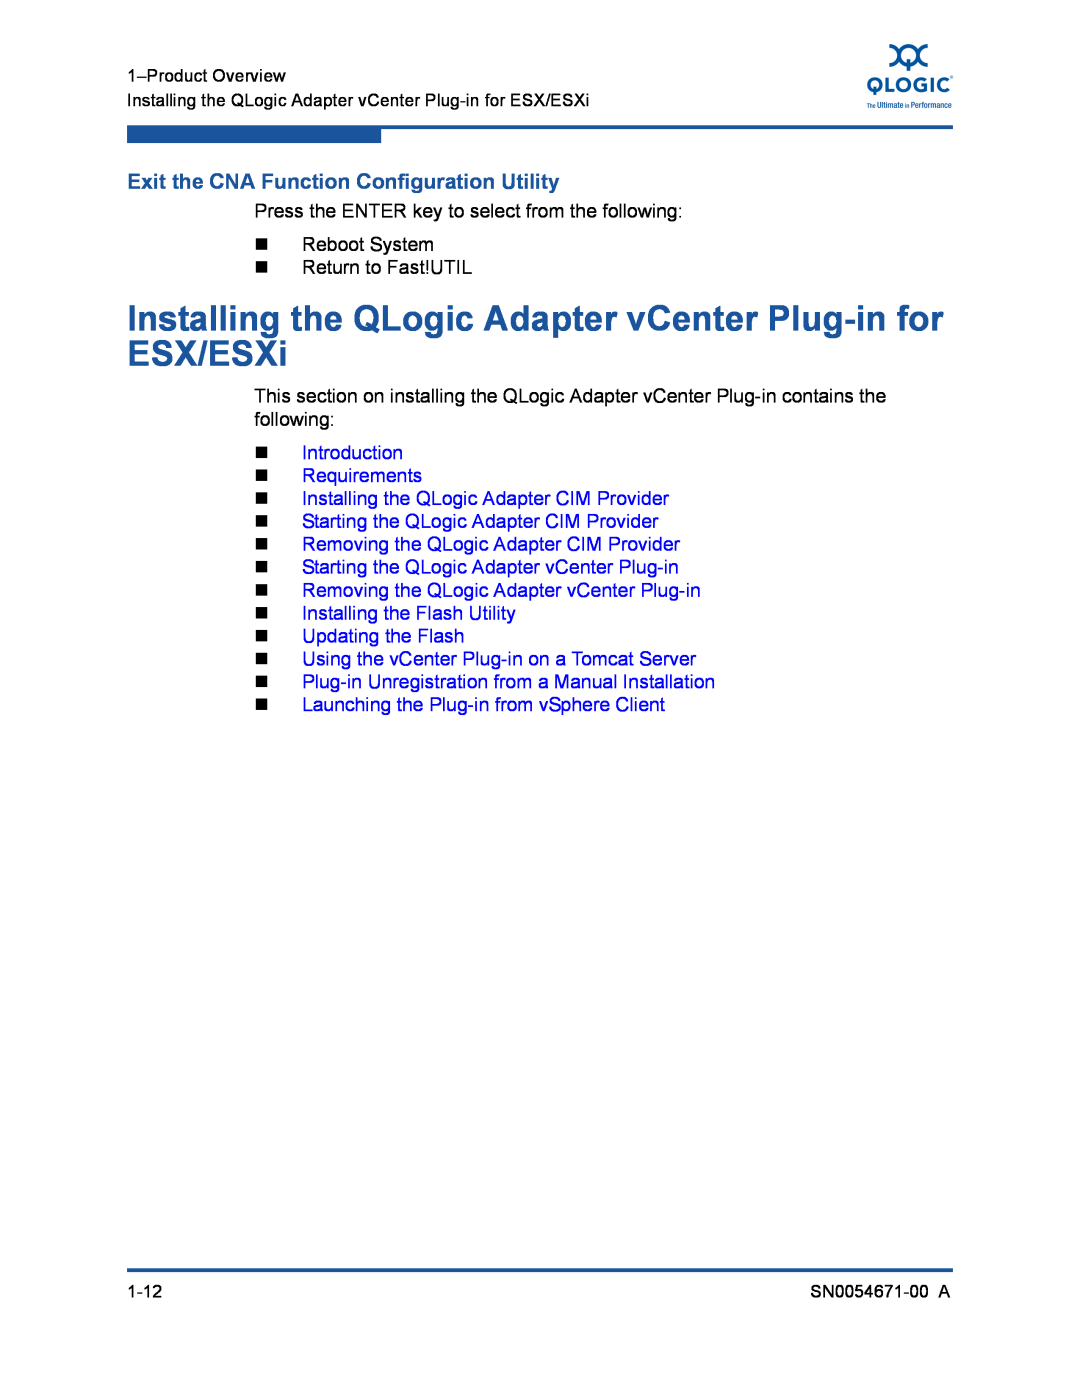 Q-Logic 8200, 3200 Installing the QLogic Adapter vCenter Plug-in for ESX/ESXi, Exit the CNA Function Configuration Utility 